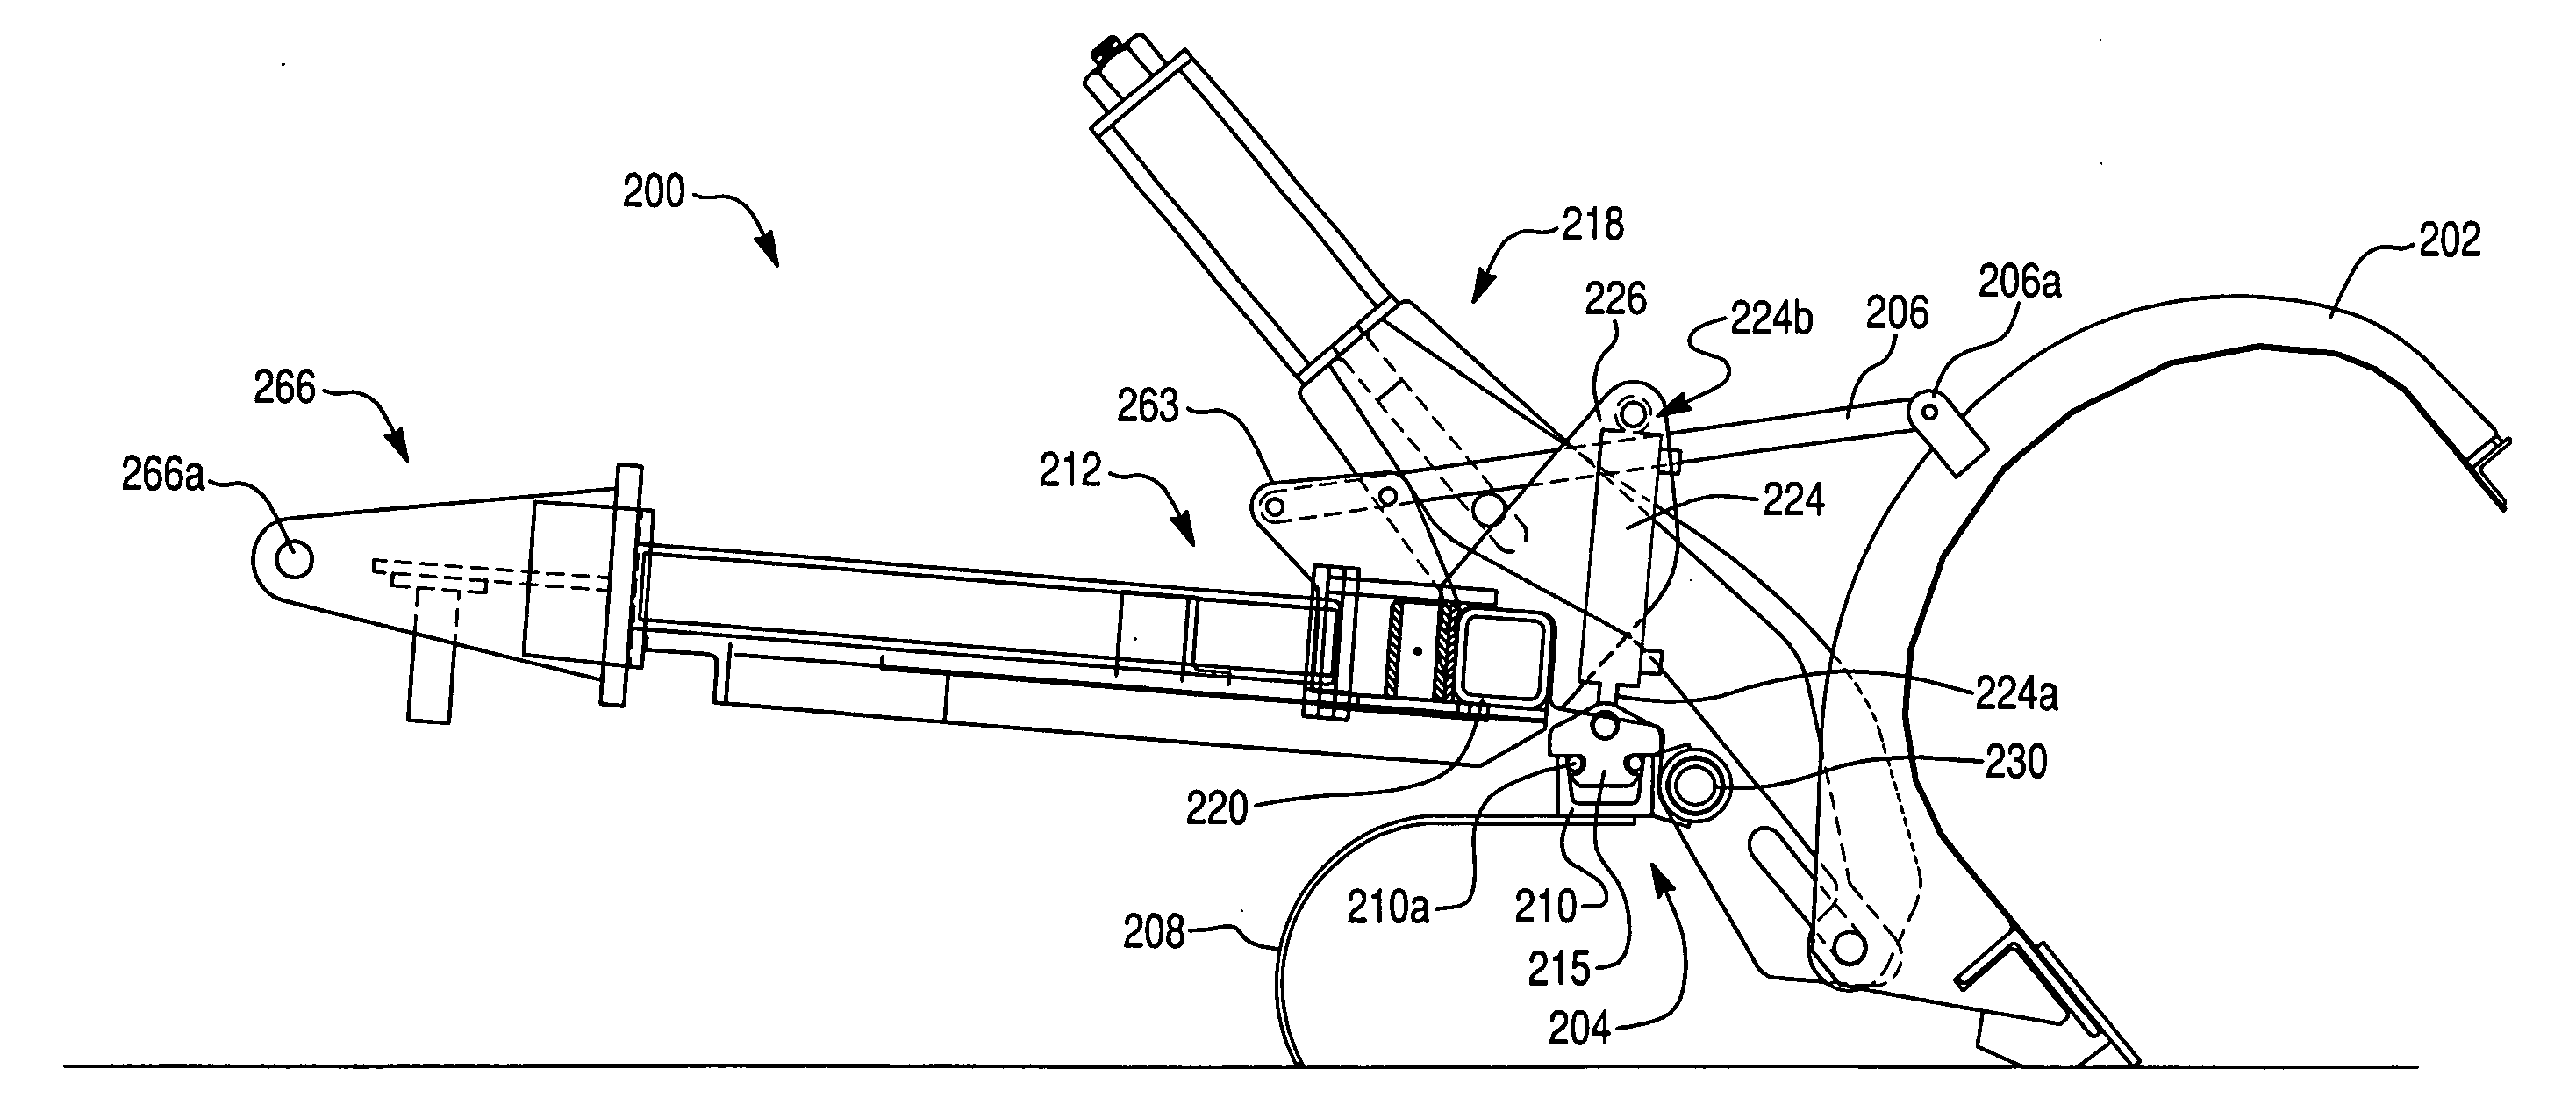 Two-stage snow plow